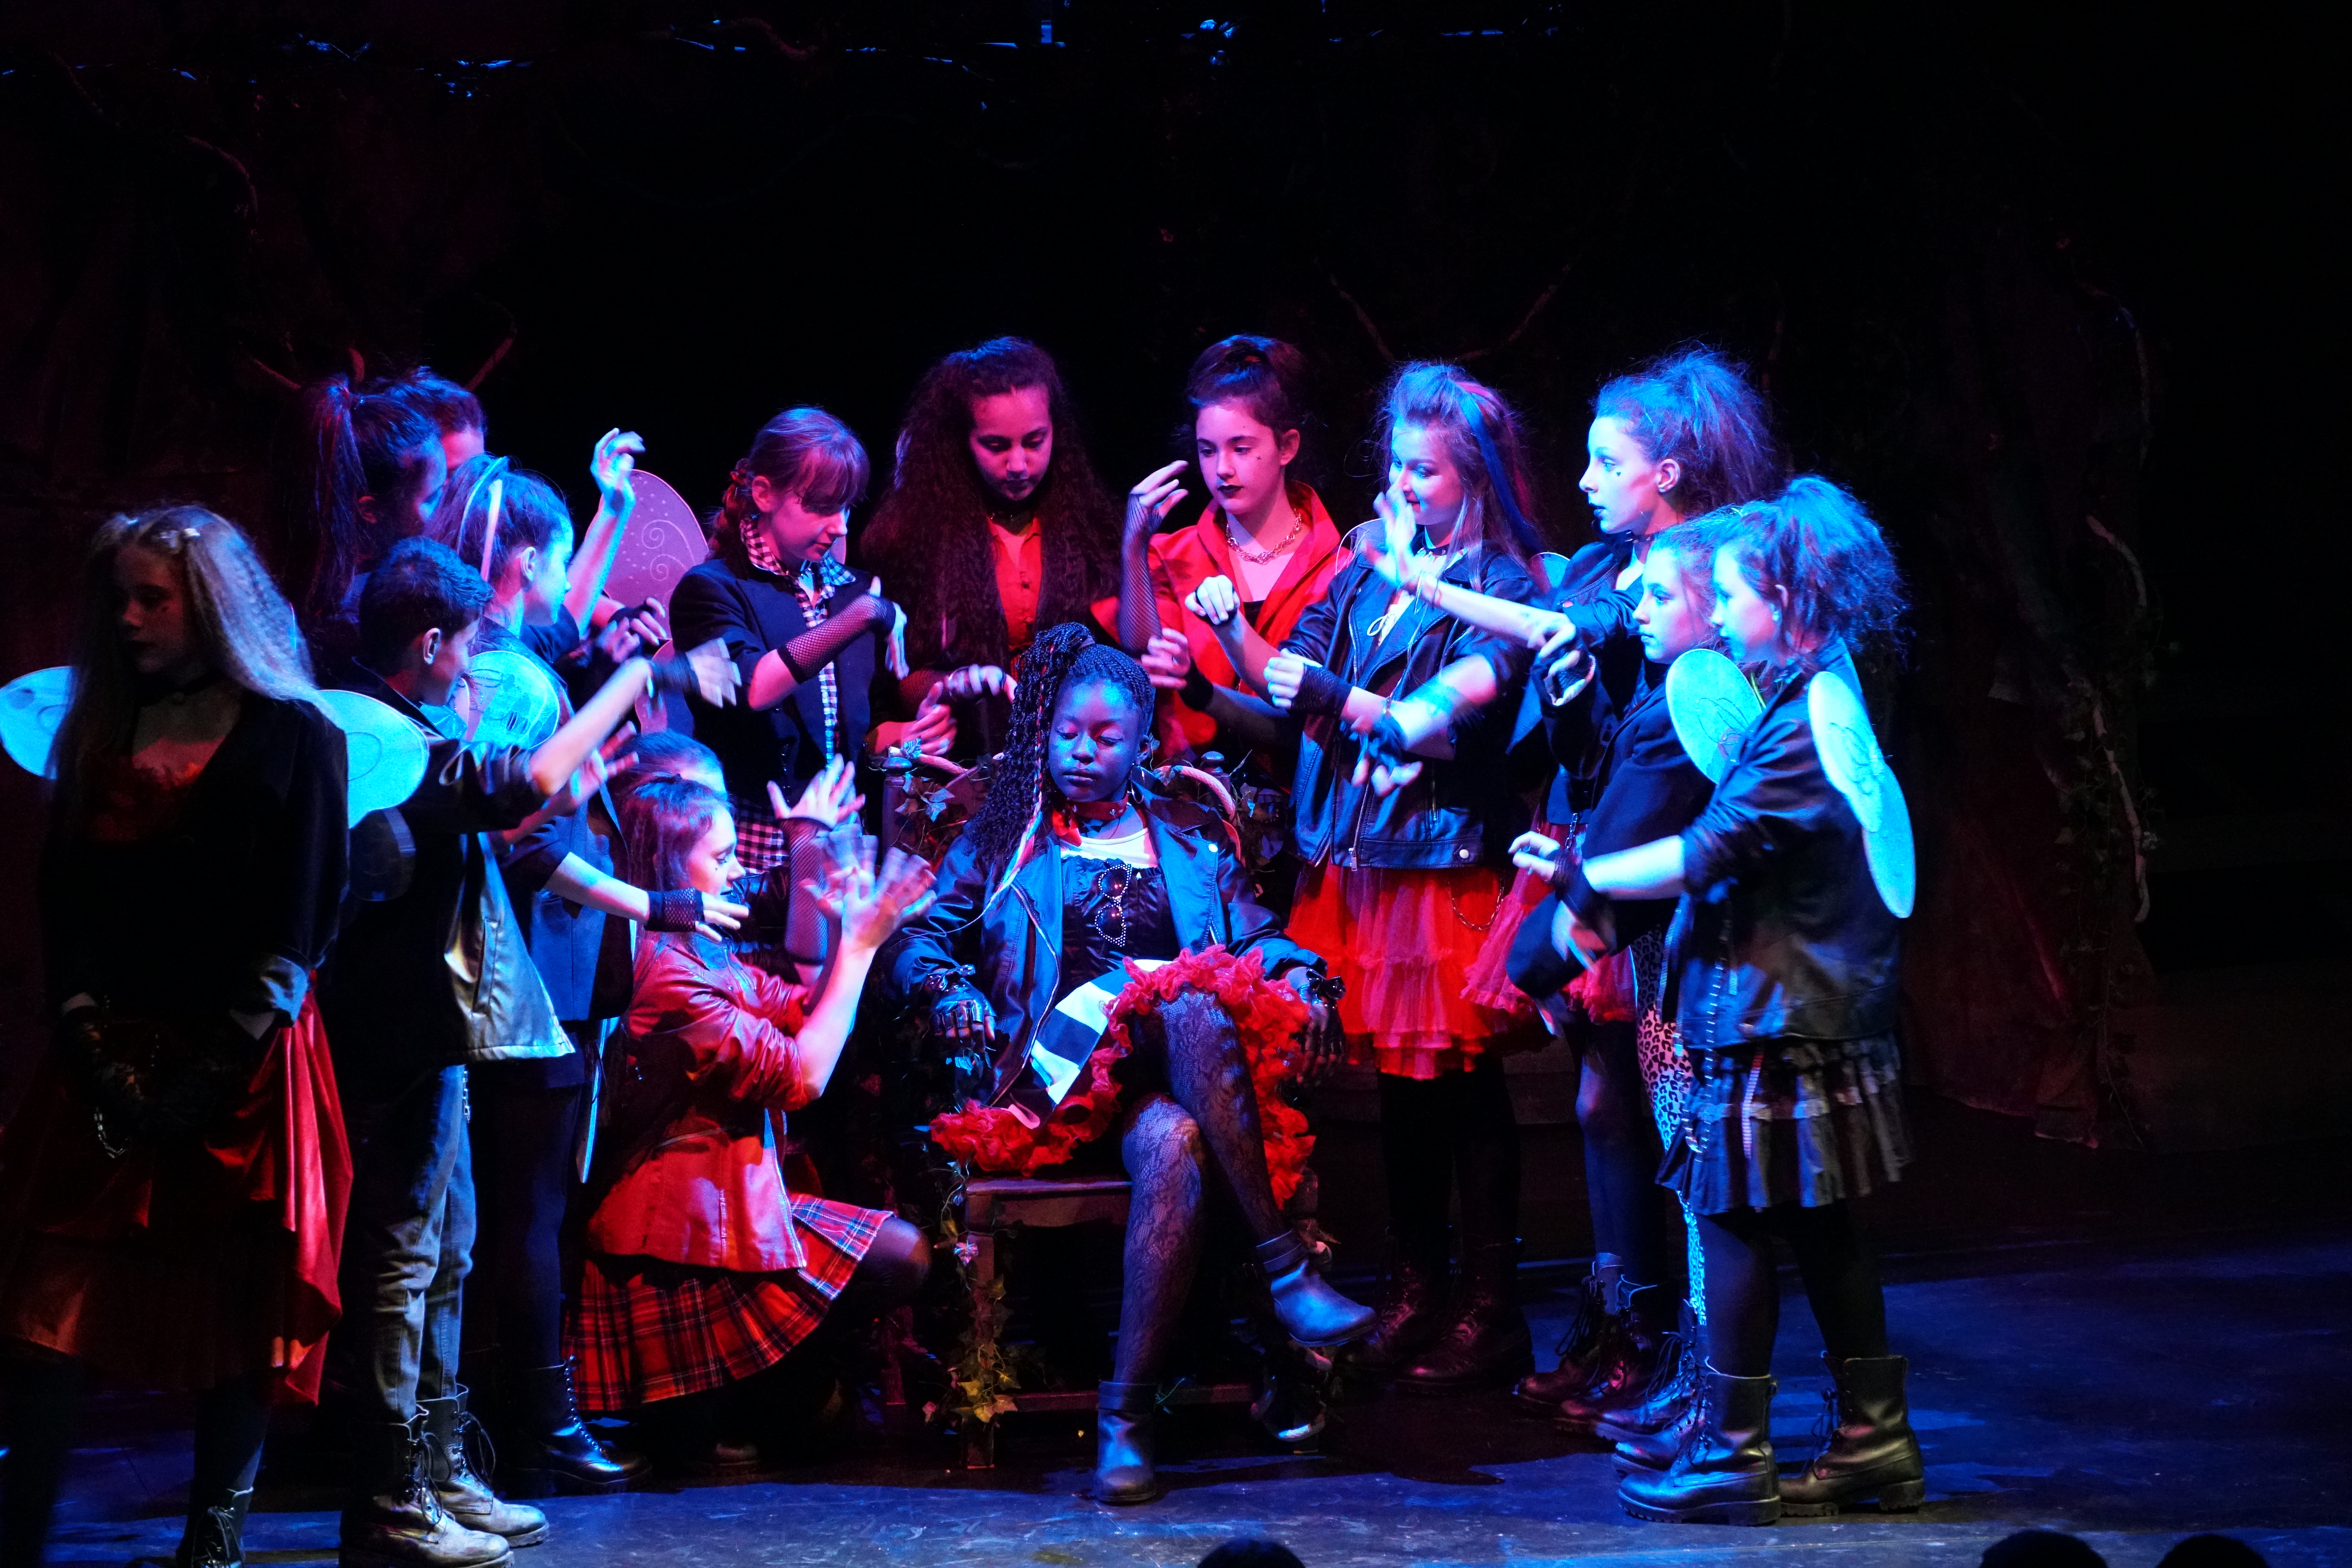 Years 7 and 8 Production of A Midsummer Night's Dream - 11 and 13 February 2020